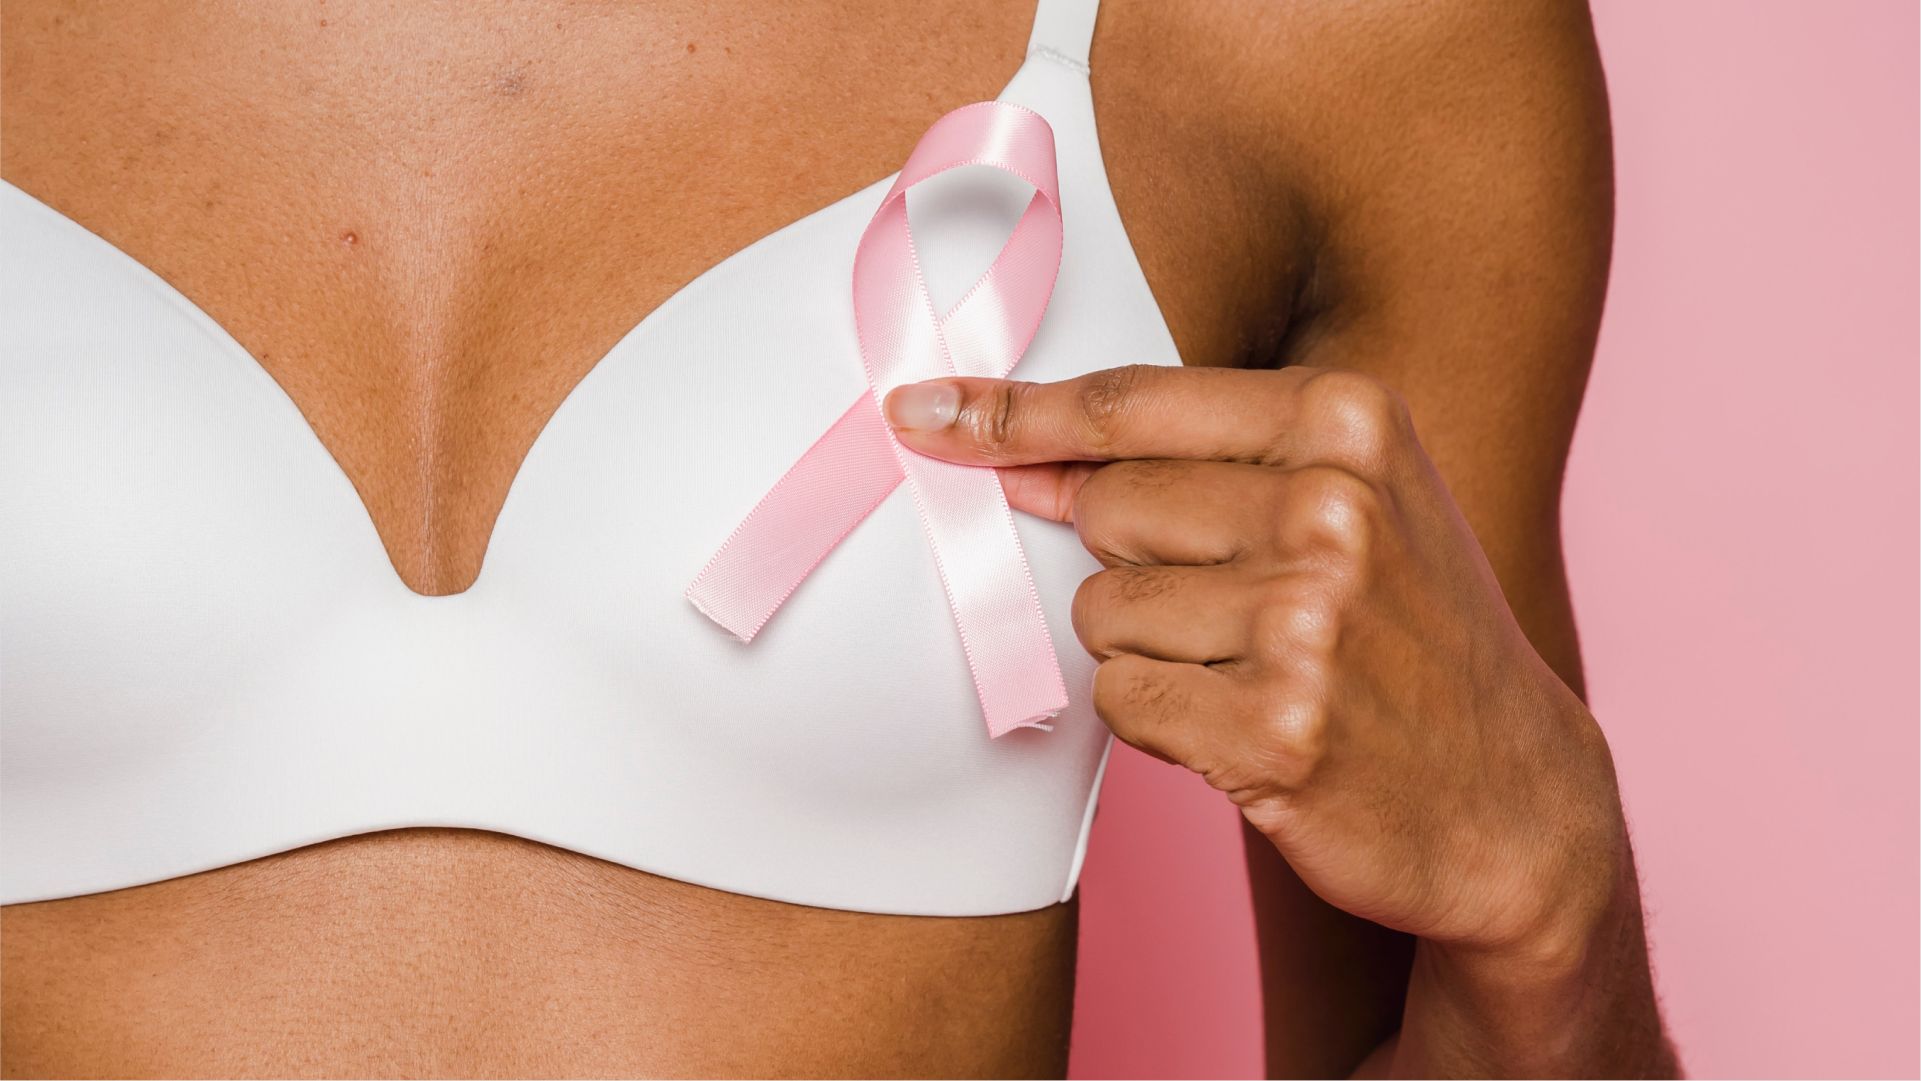 Breast Cancer Facts for Teens  Risks of Carrying Phone in Bra